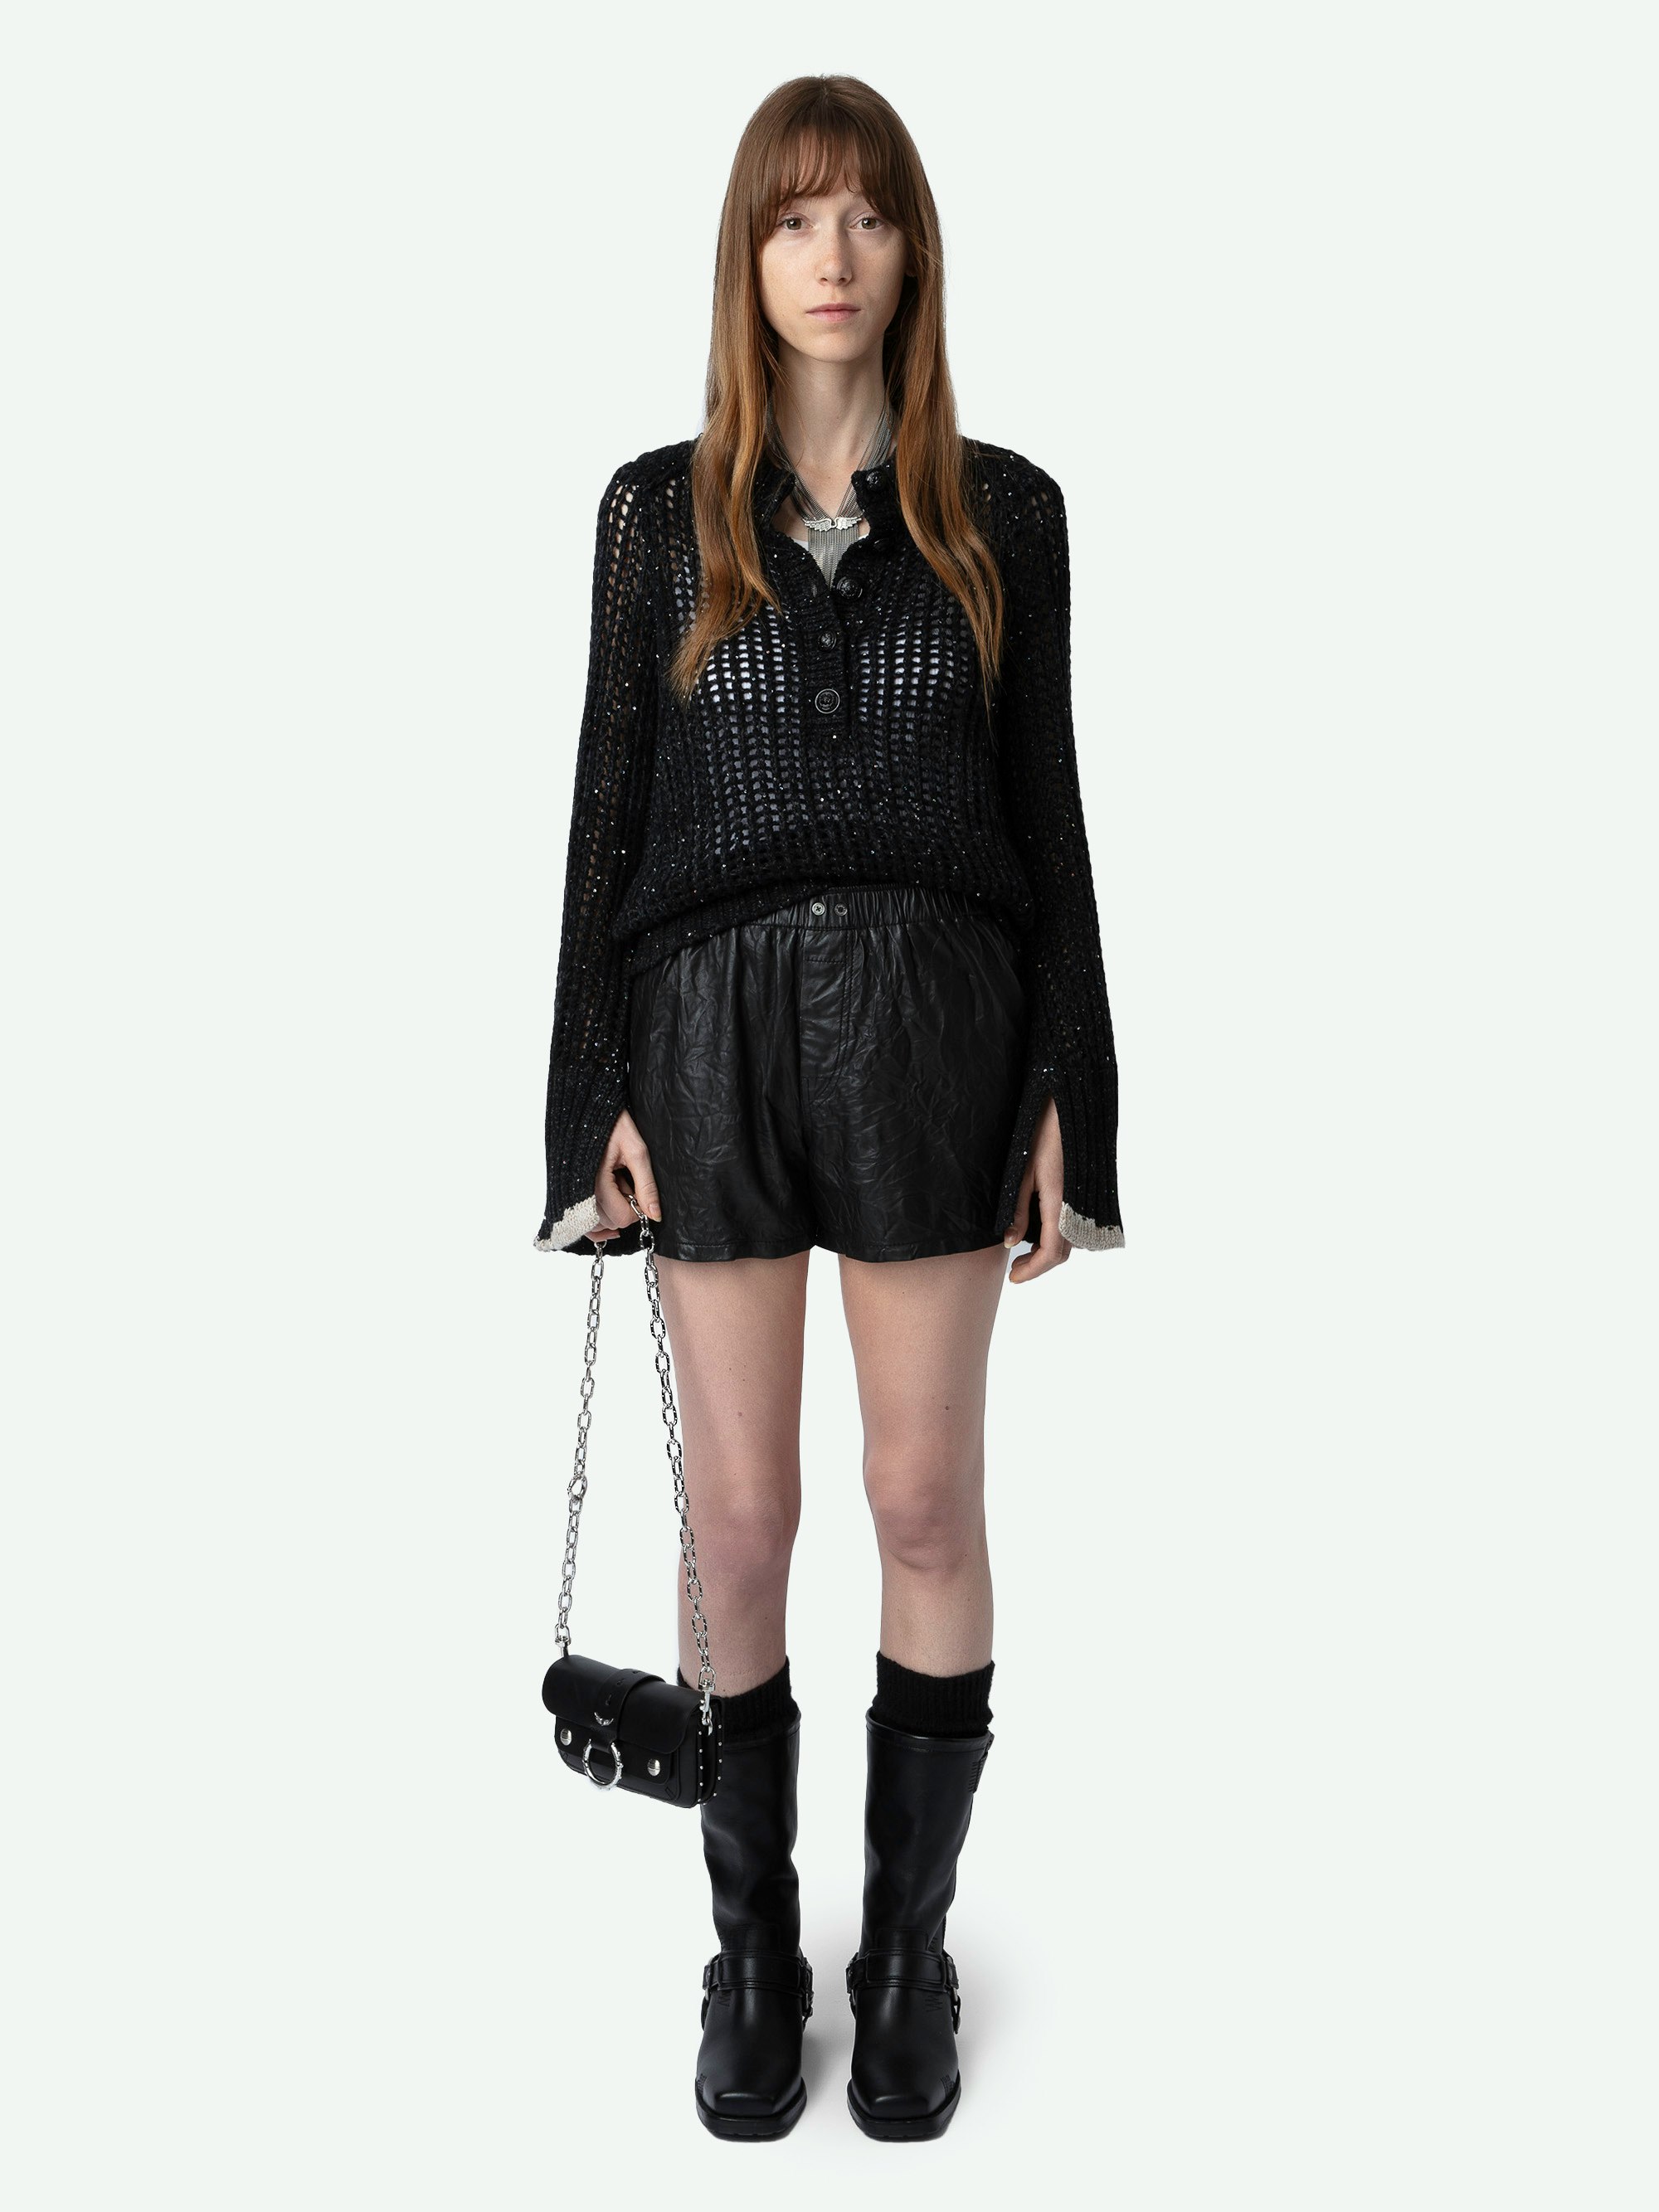 Halty Sweater - Long-sleeved black mesh-knit wool sweater with sequins and contrasting split cuffs.